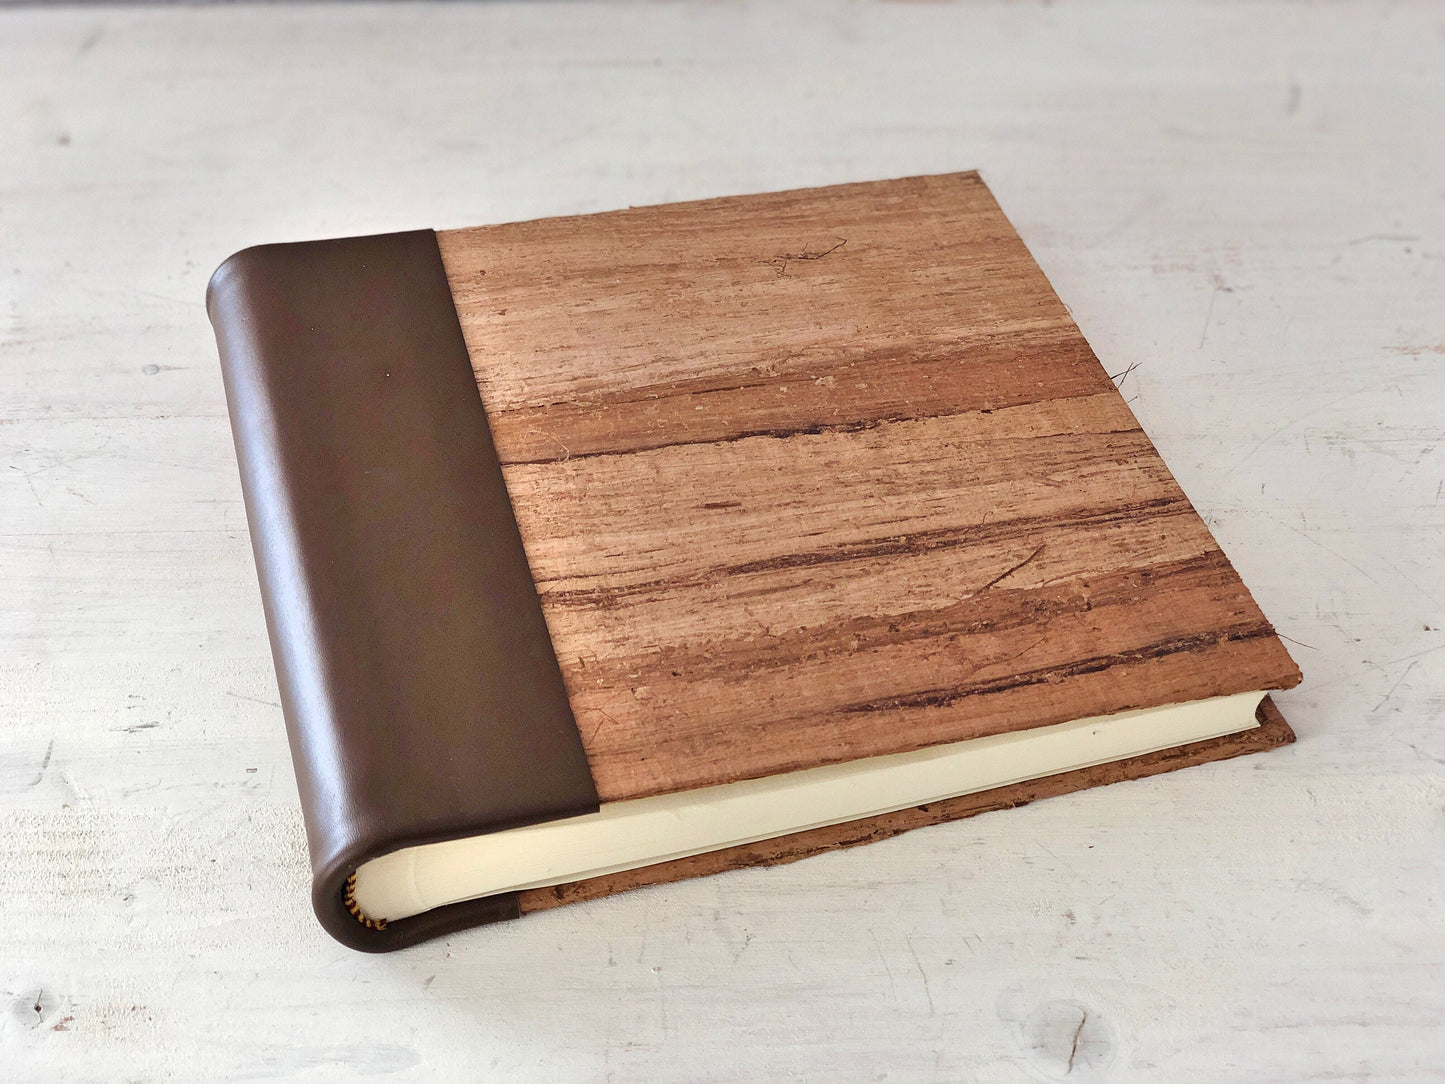 Square Wooden Photo Album Scrapbook, Gift for Wedding, Family Heirloom Keepsake Photo book, Memory Book, Gift for grandparents, godmother